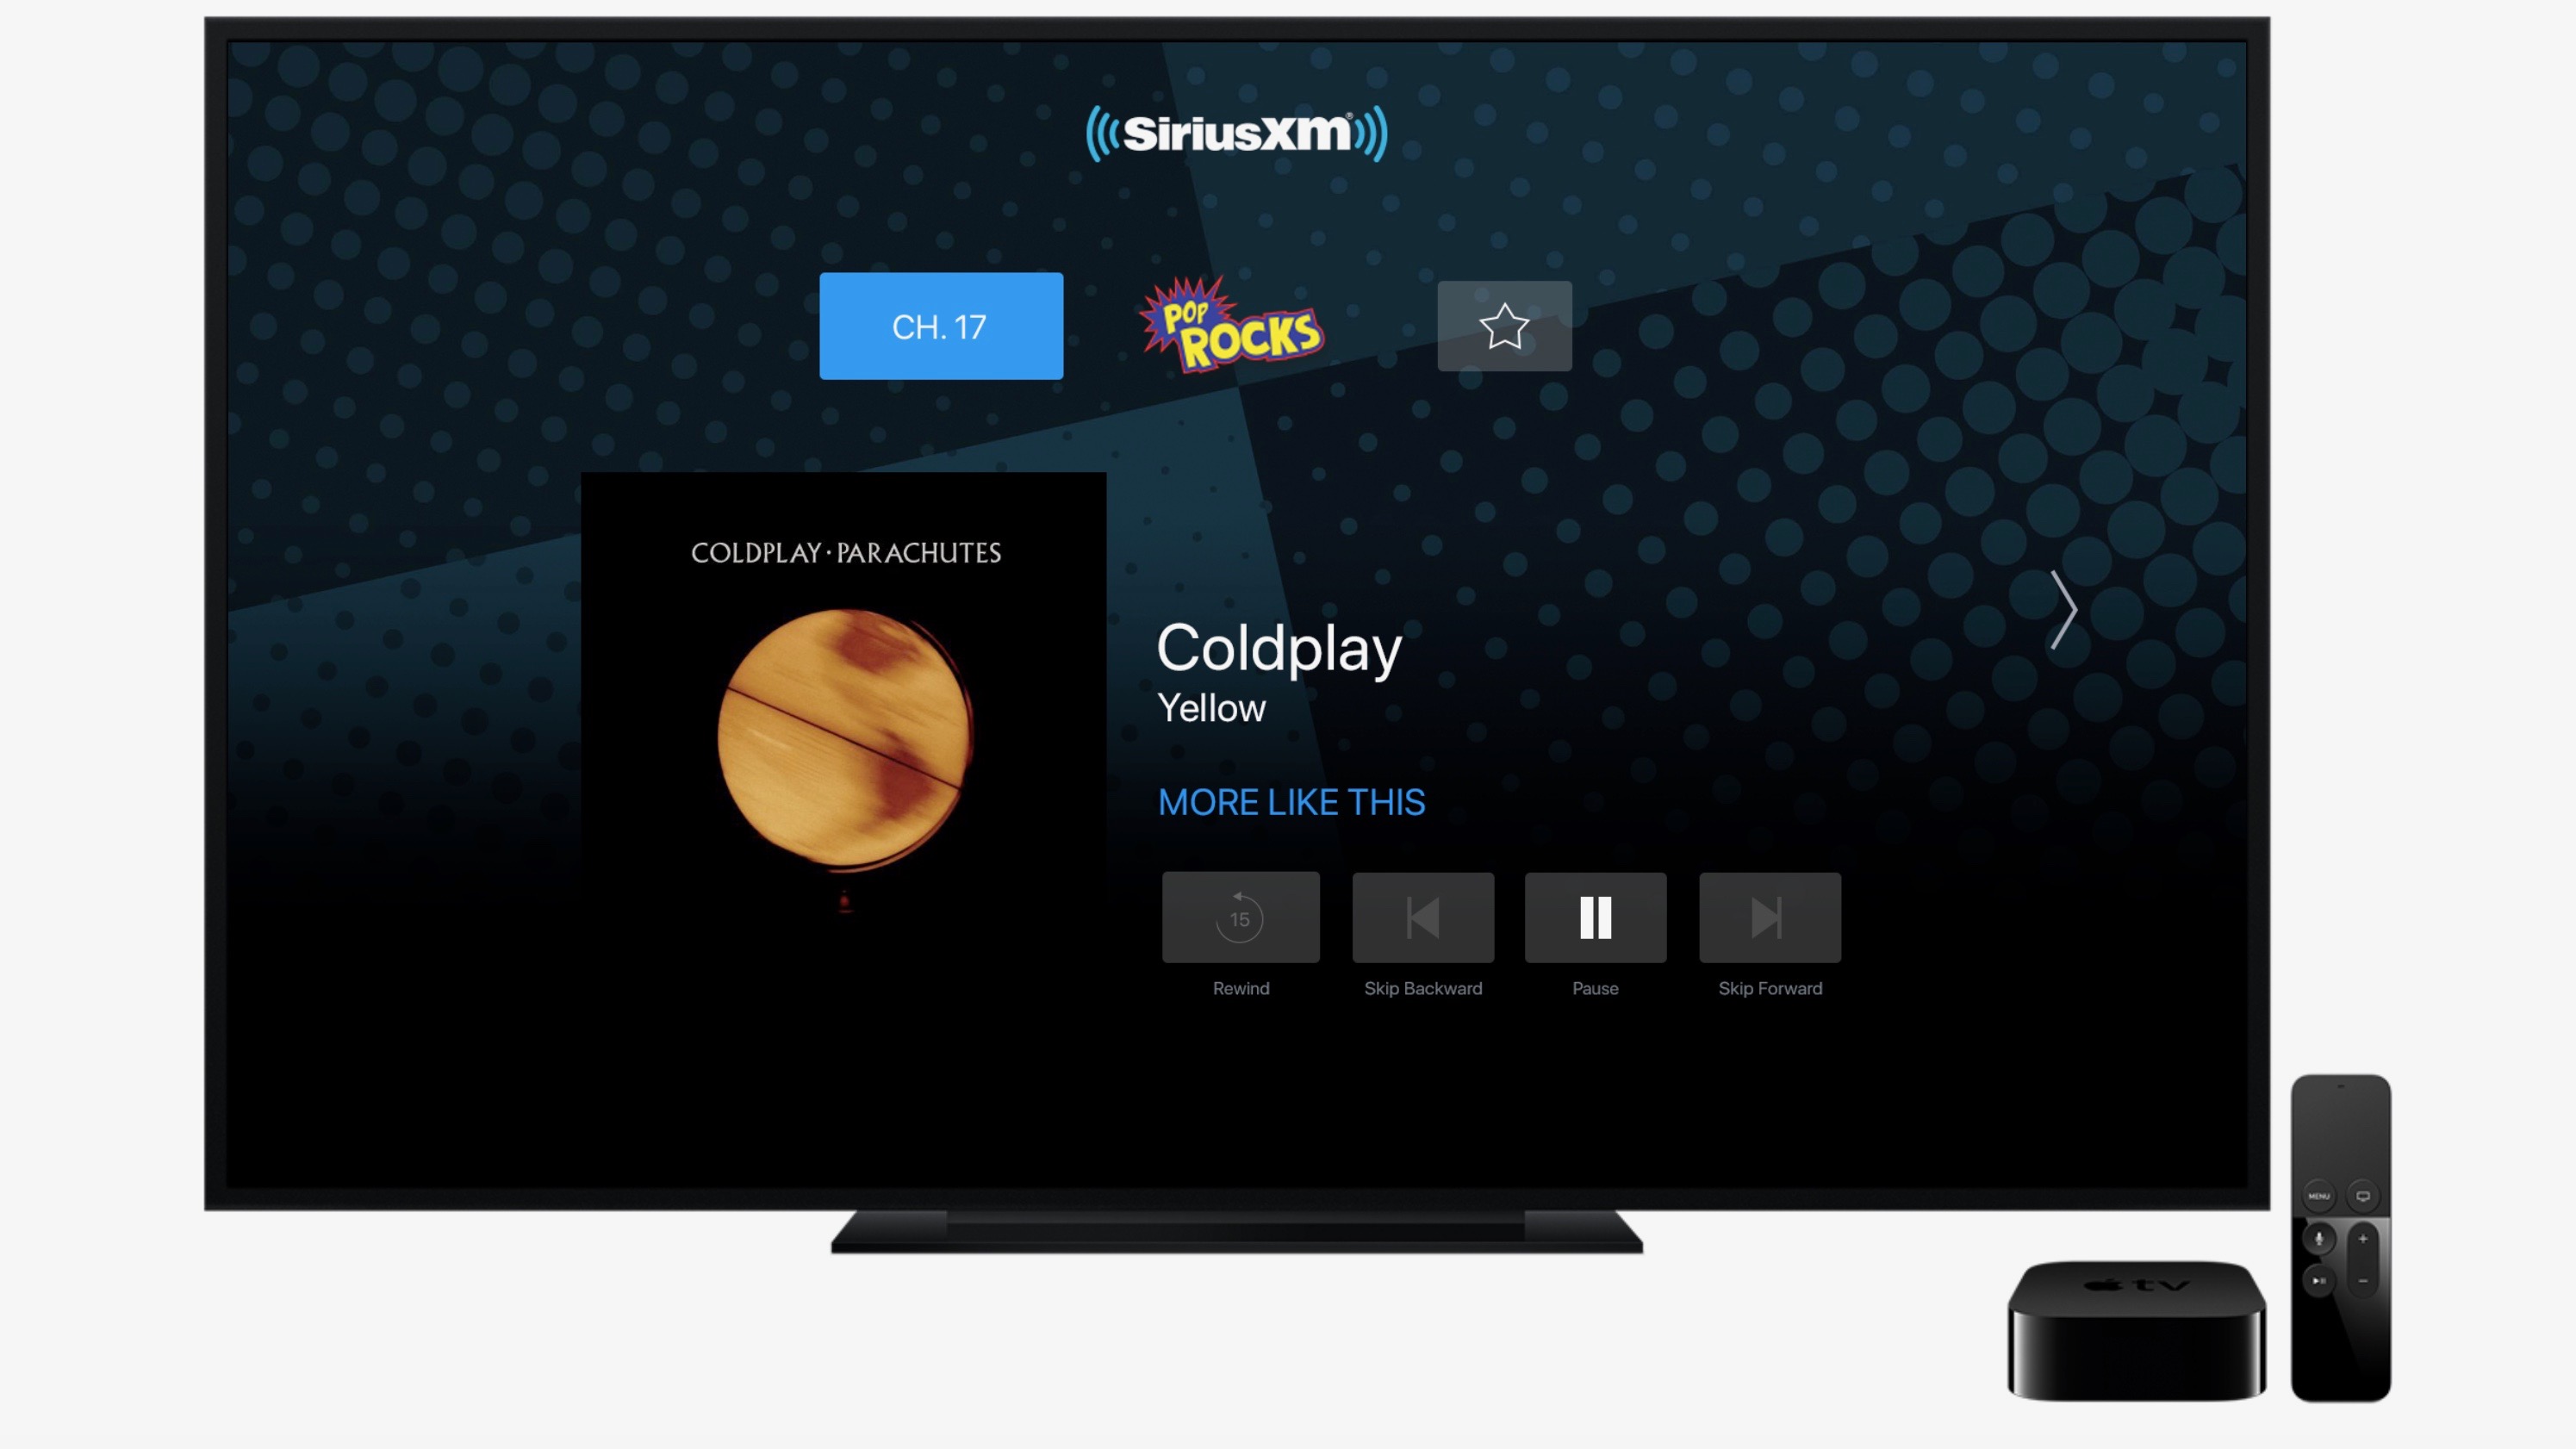 SiriusXM releases new app bringing streaming radio service to Apple TV  users - 9to5Mac